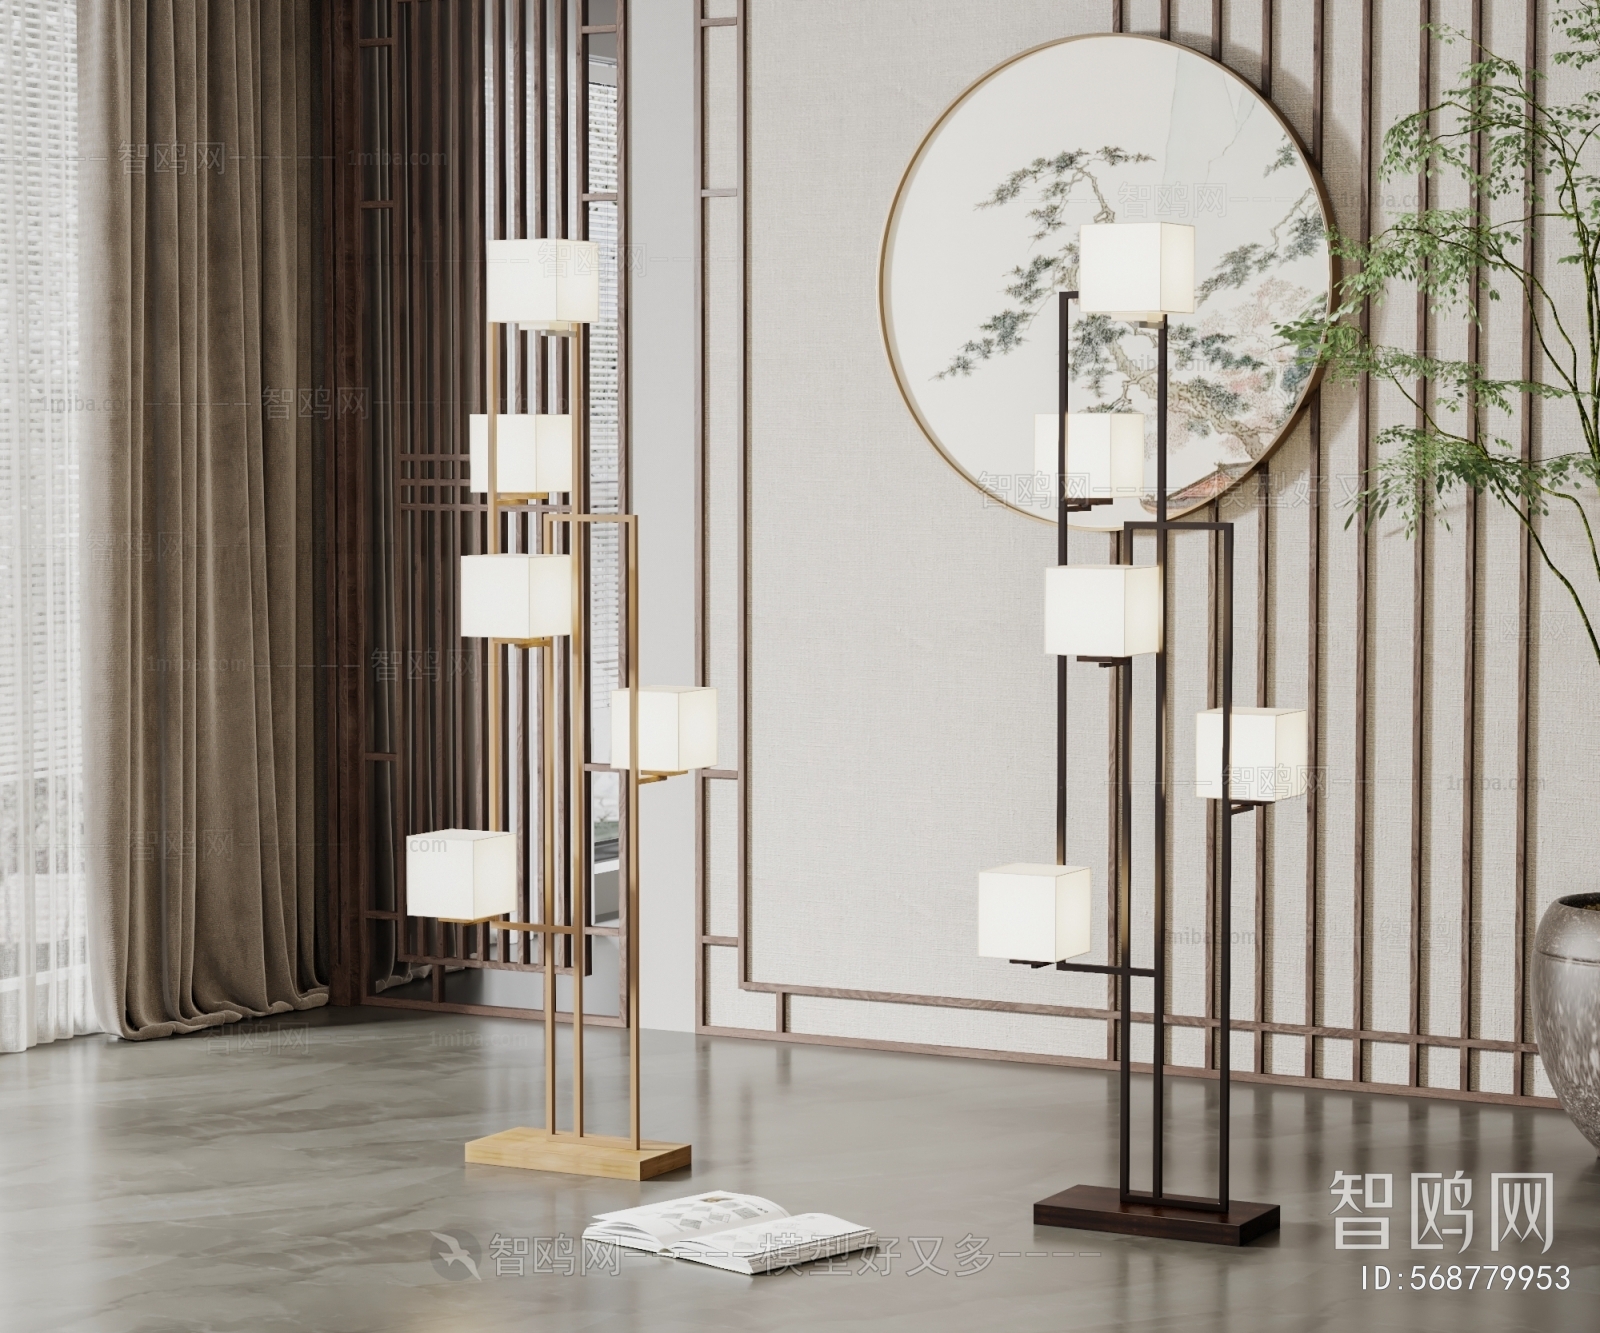 New Chinese Style Floor Lamp